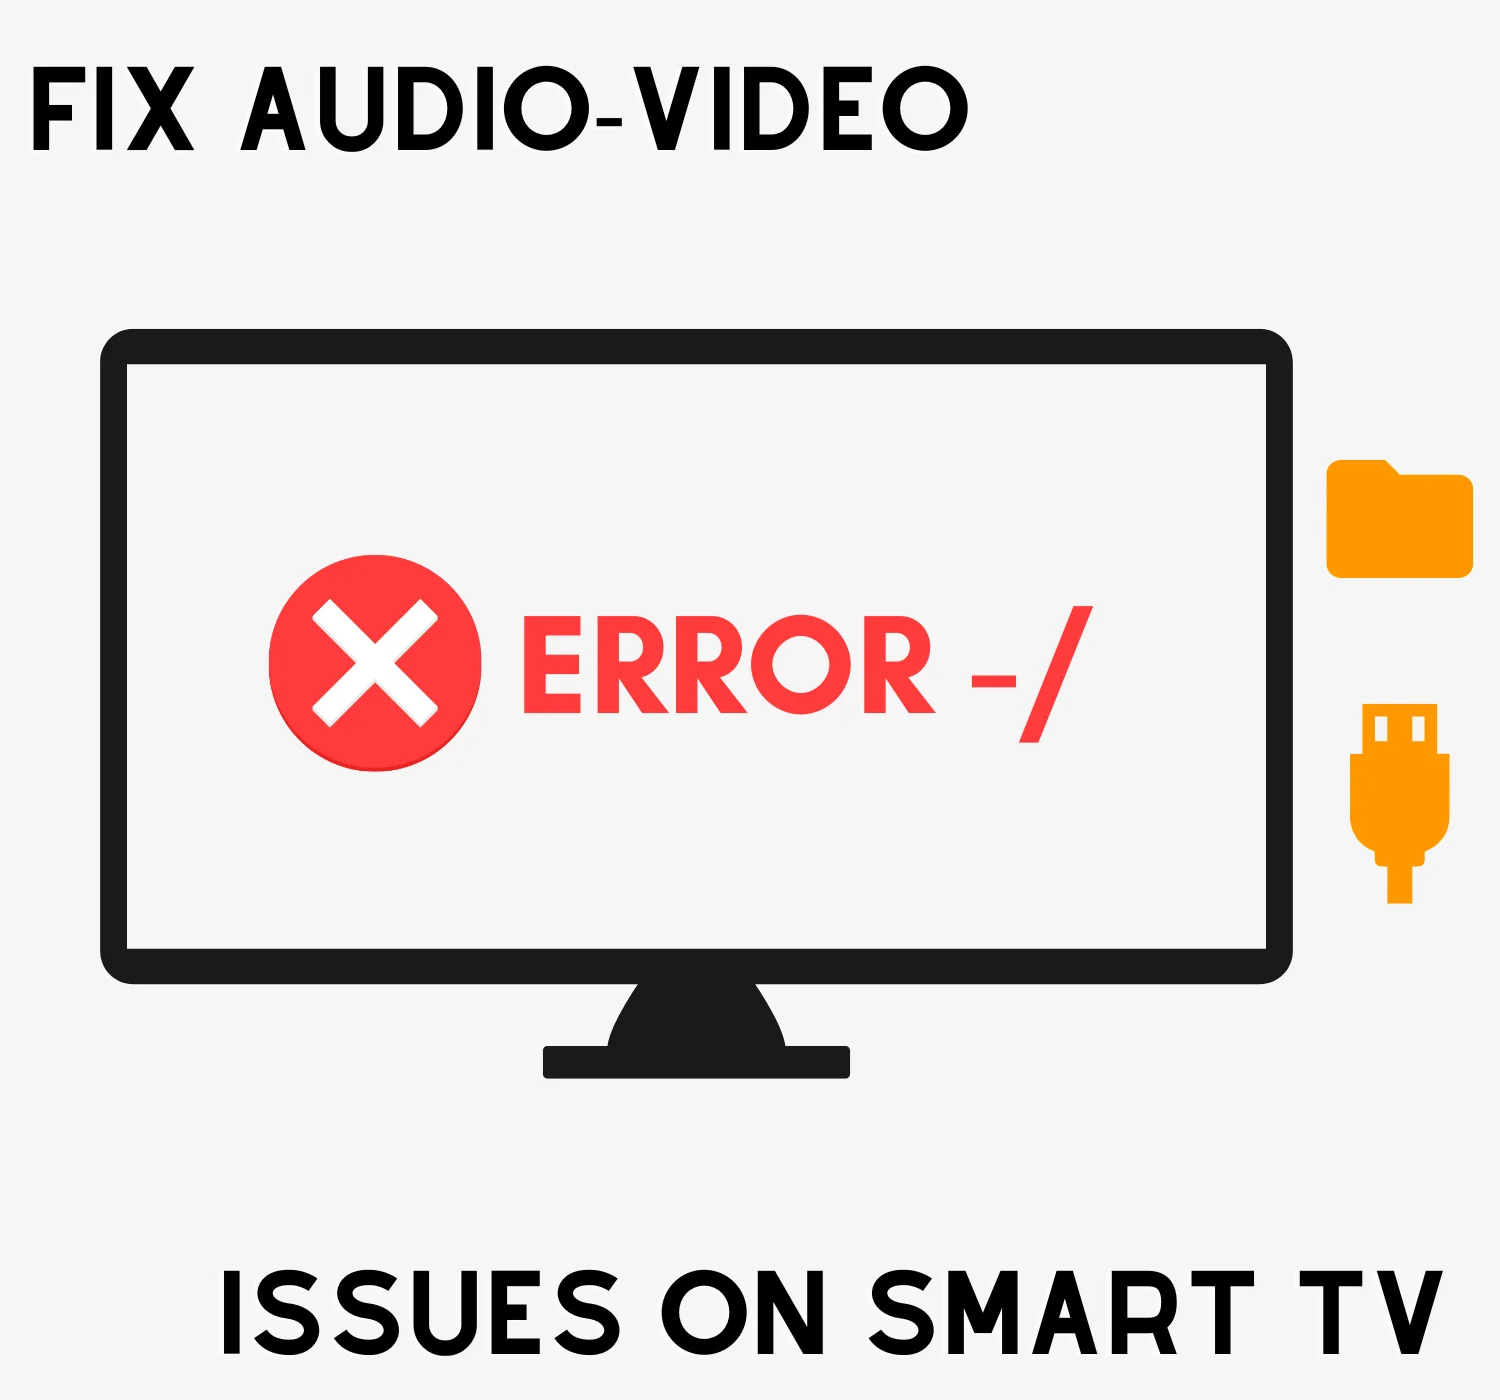 How to Fix Audio-Video Format Issues on Smart TV